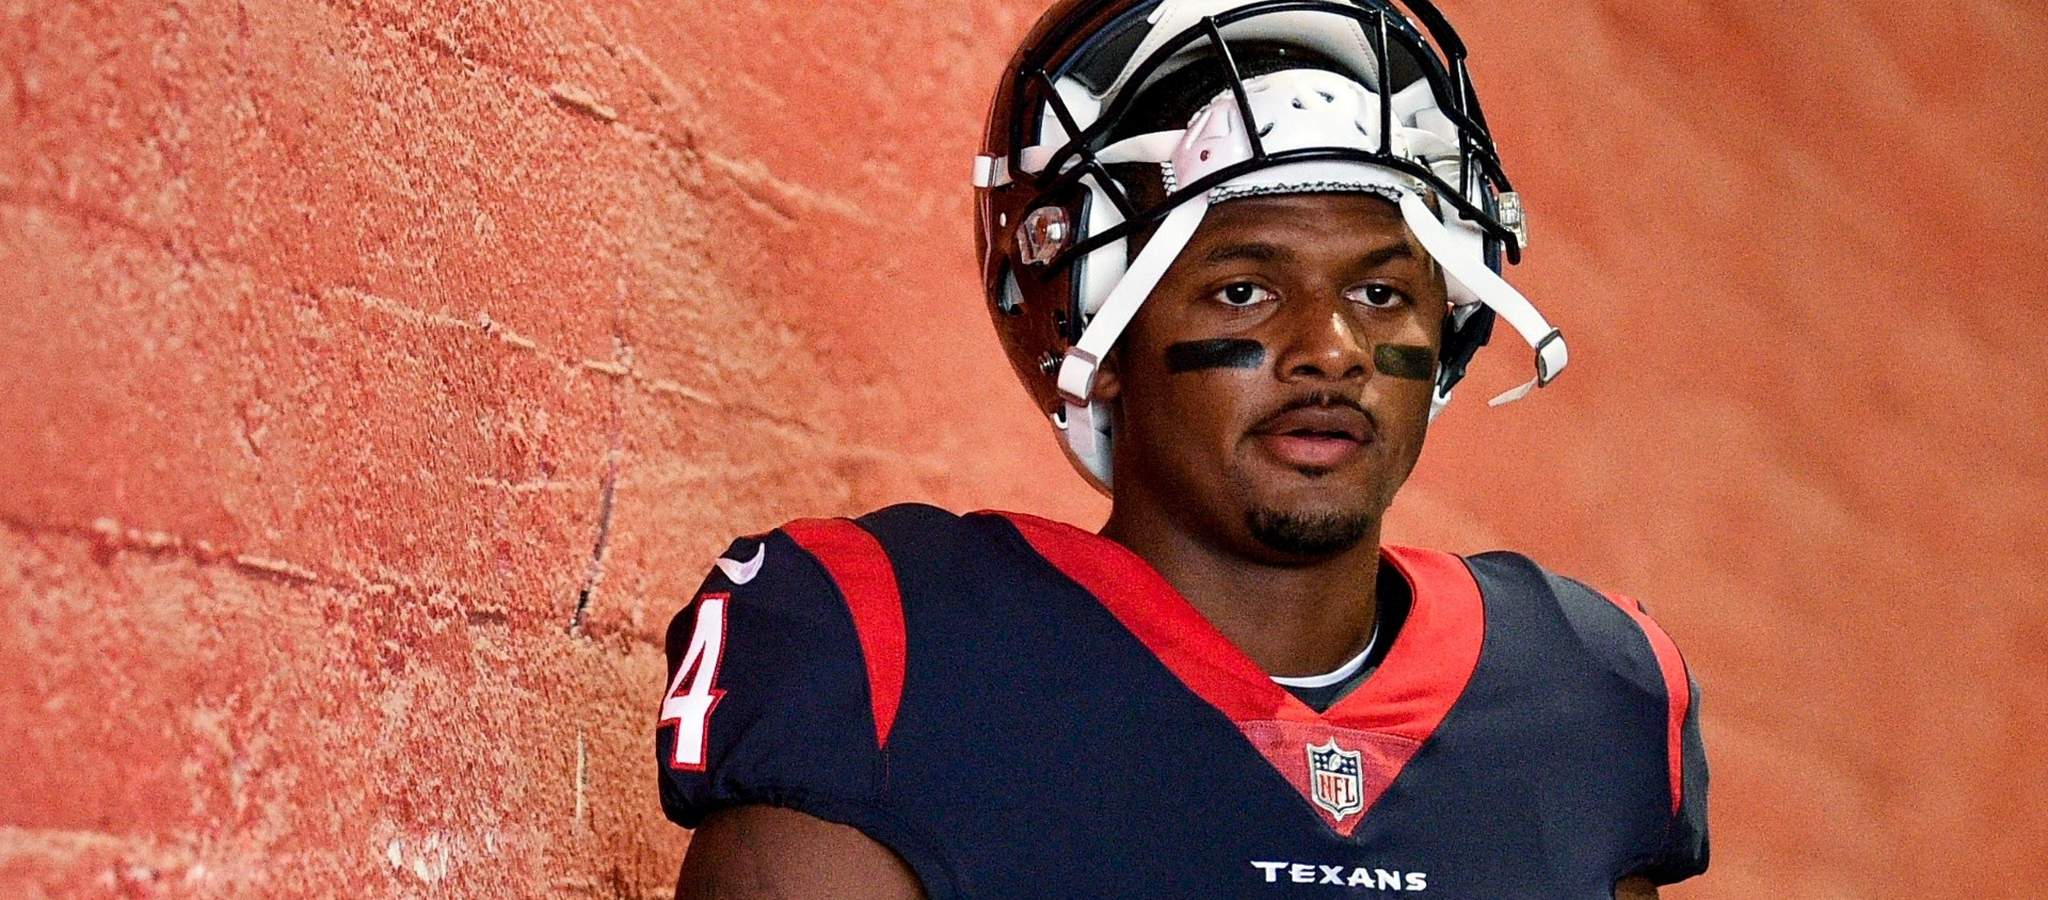 Attorney: At least 1 of Deshaun Watson’s accusers attempted to blackmail him